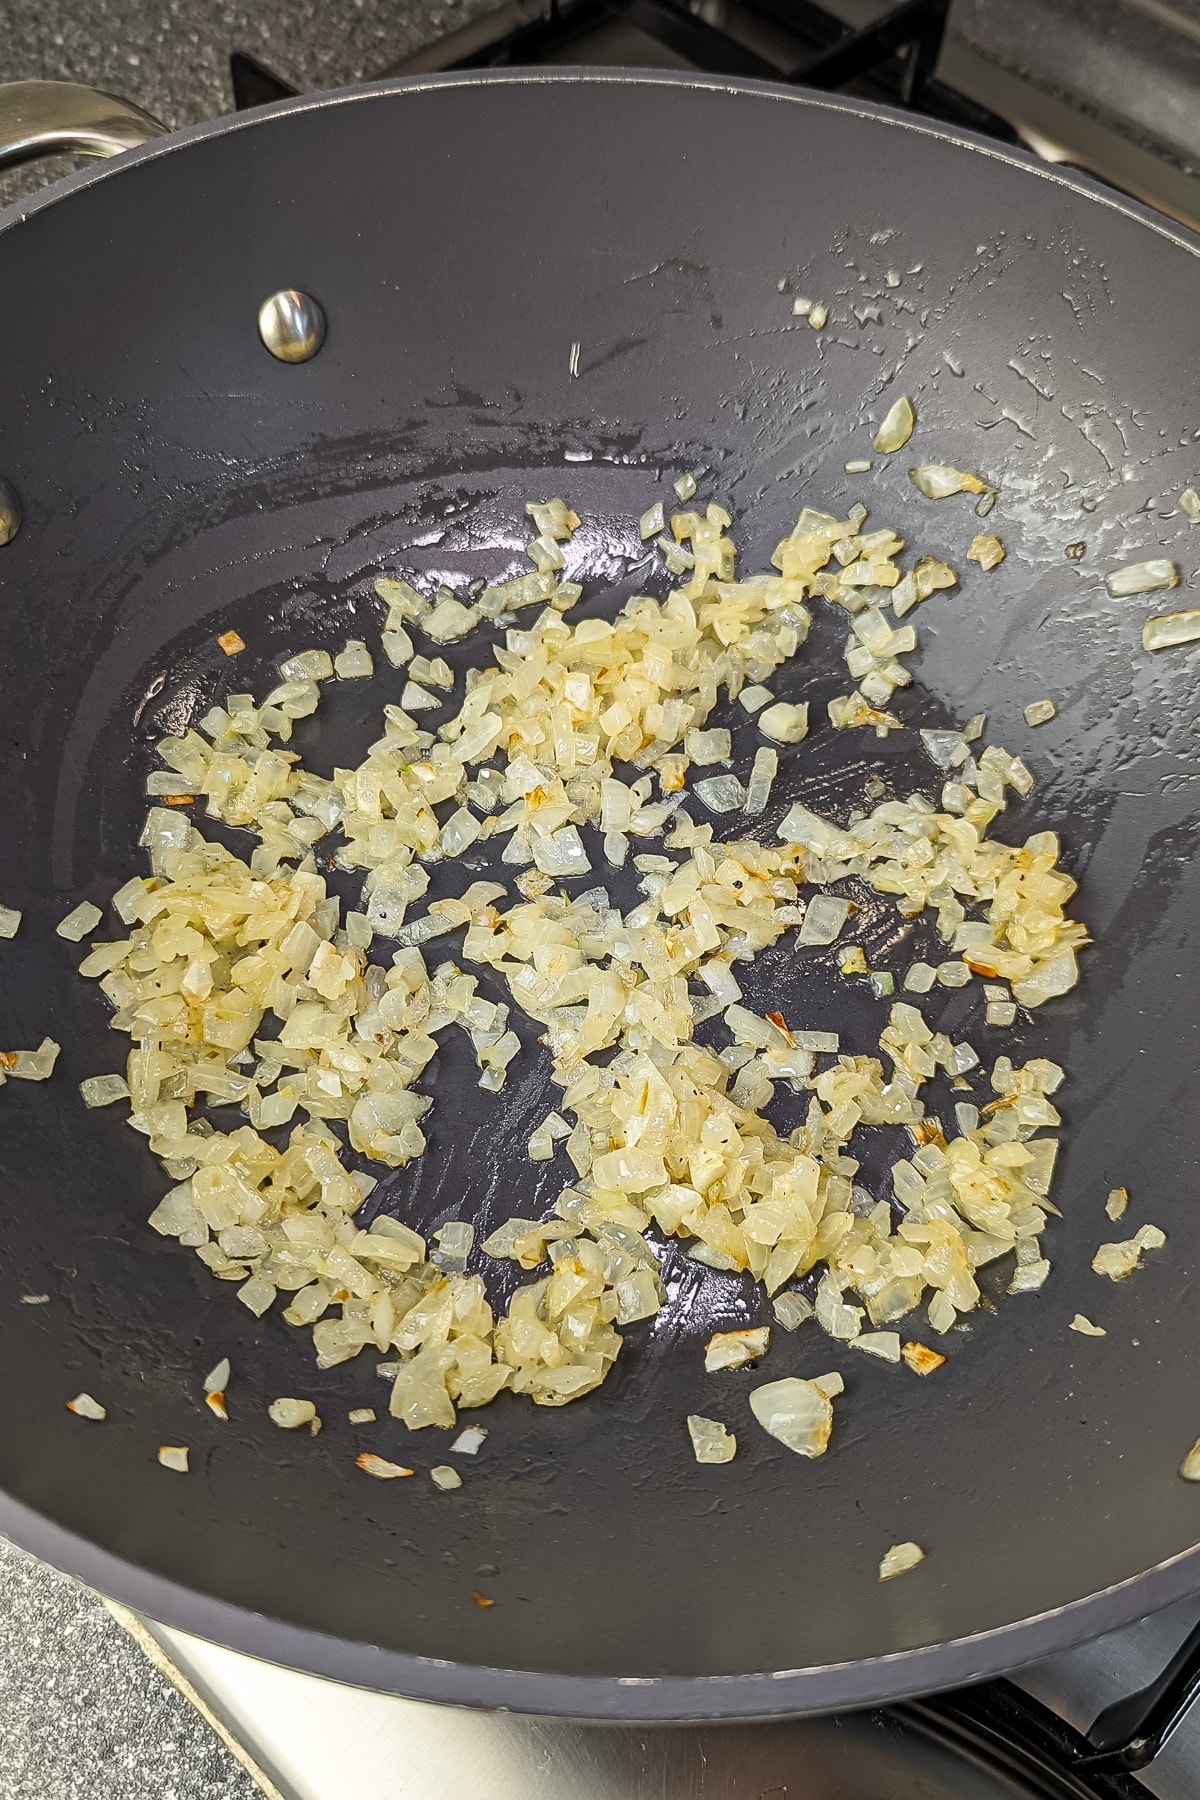 Diced onions sautéed to a translucent state in a large, non-stick frying pan.